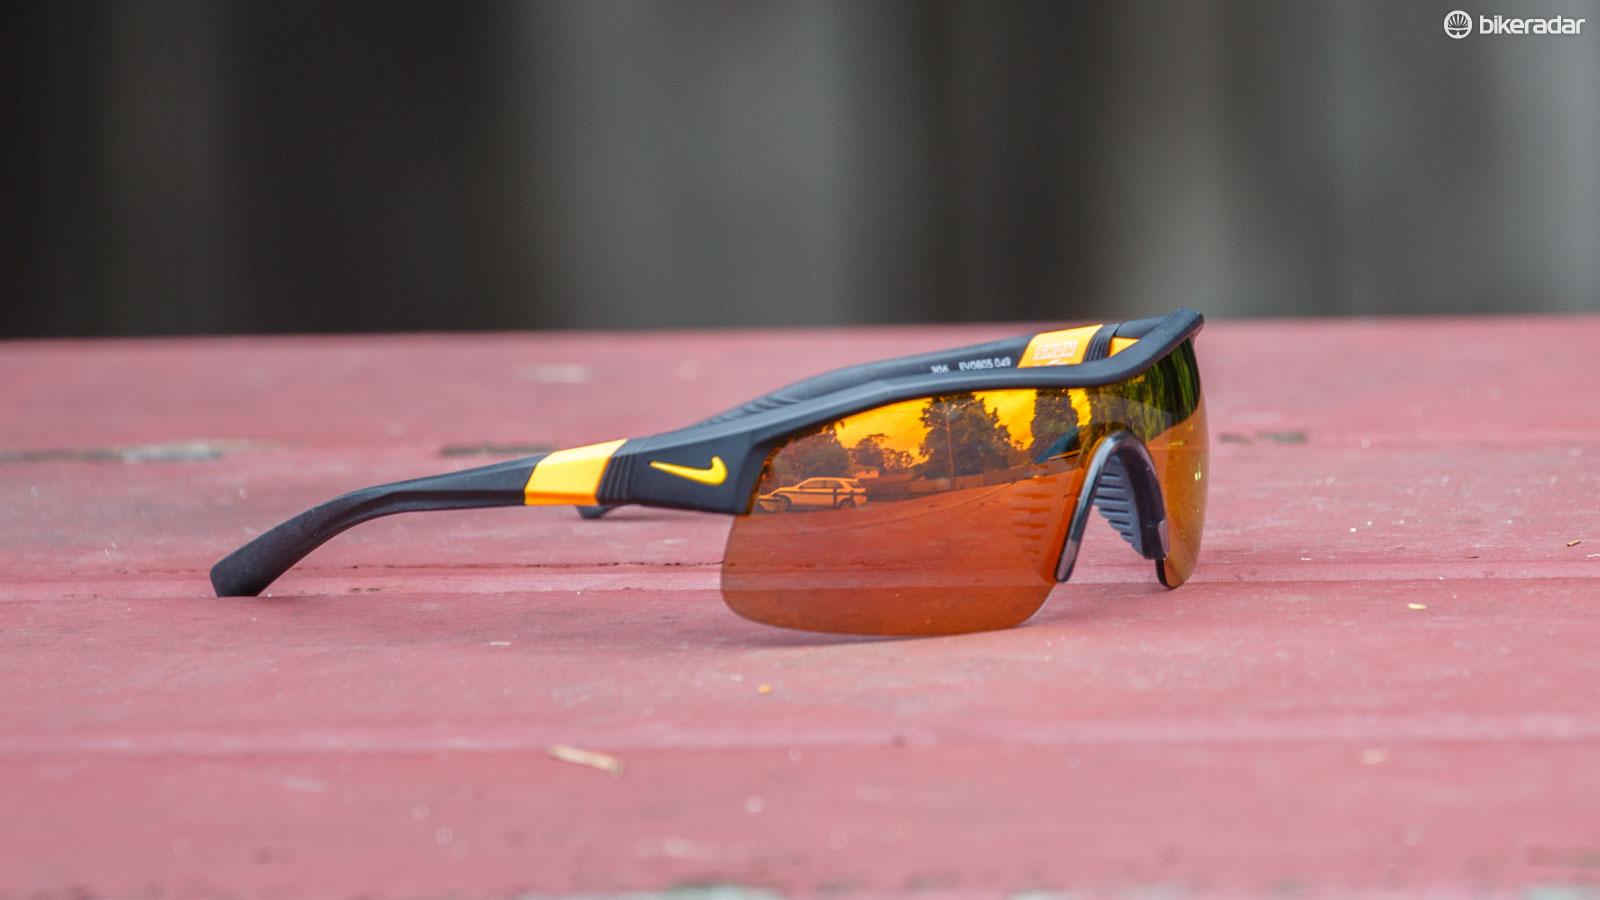 Sunglasses with resistance to seawater corrosion.